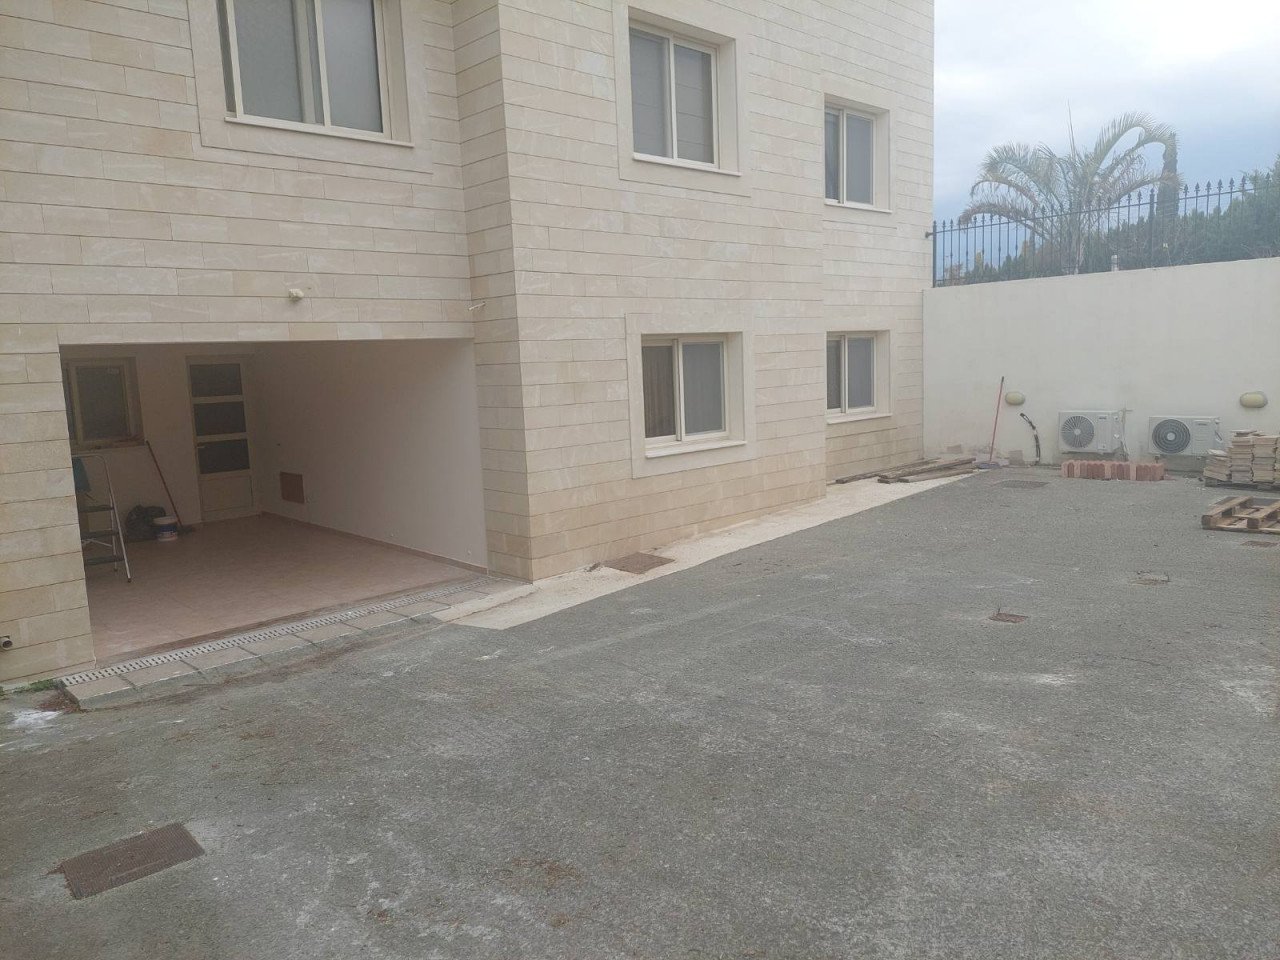 Property for Rent: Apartment (Flat) in Pyrgos, Limassol for Rent | Key Realtor Cyprus